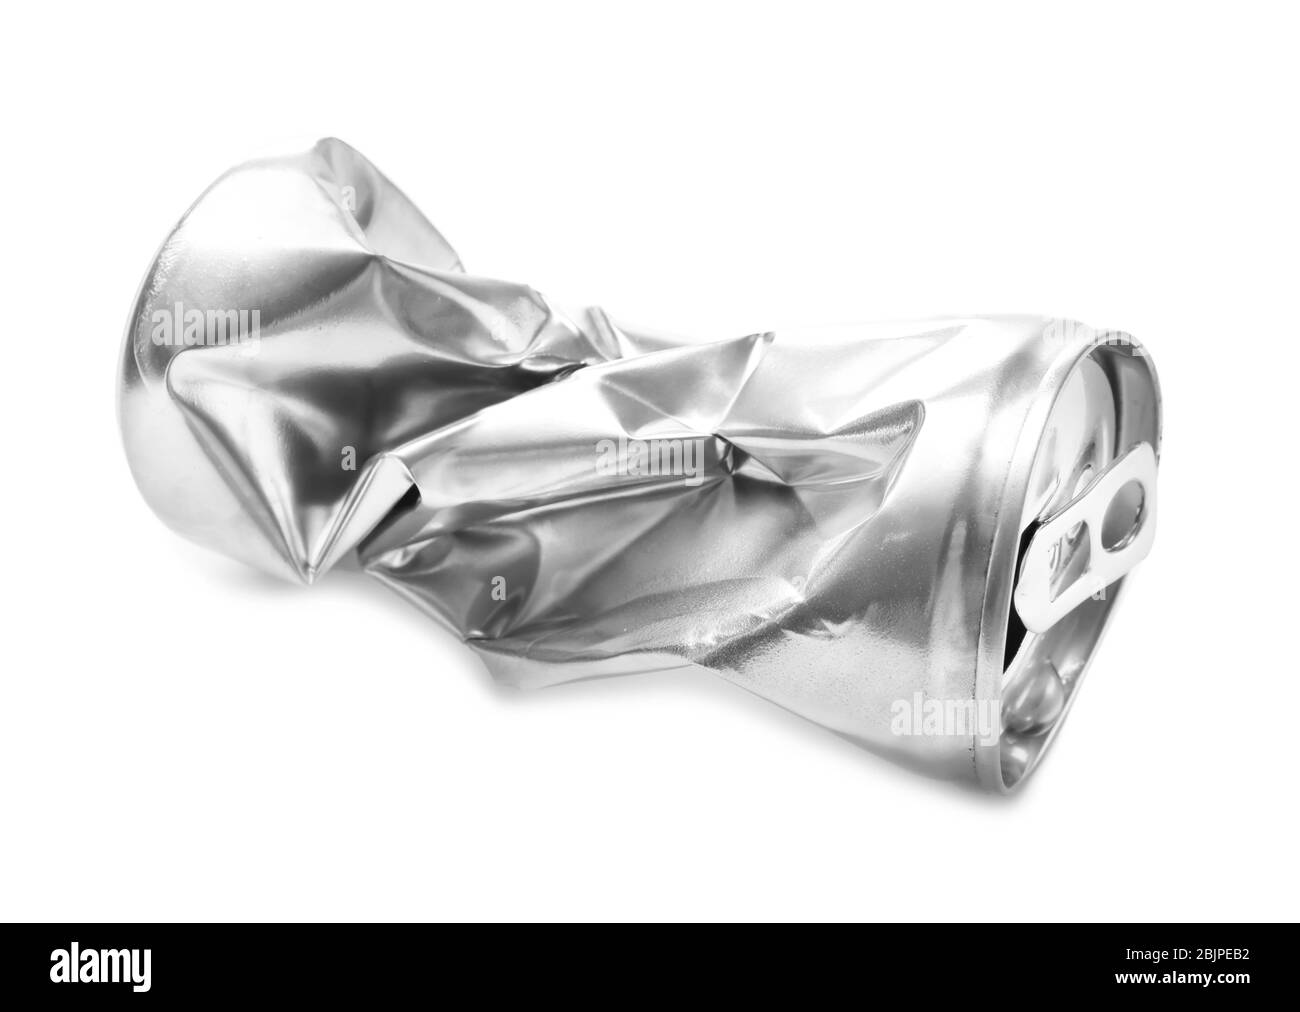 Crumpled empty can on white background Stock Photo